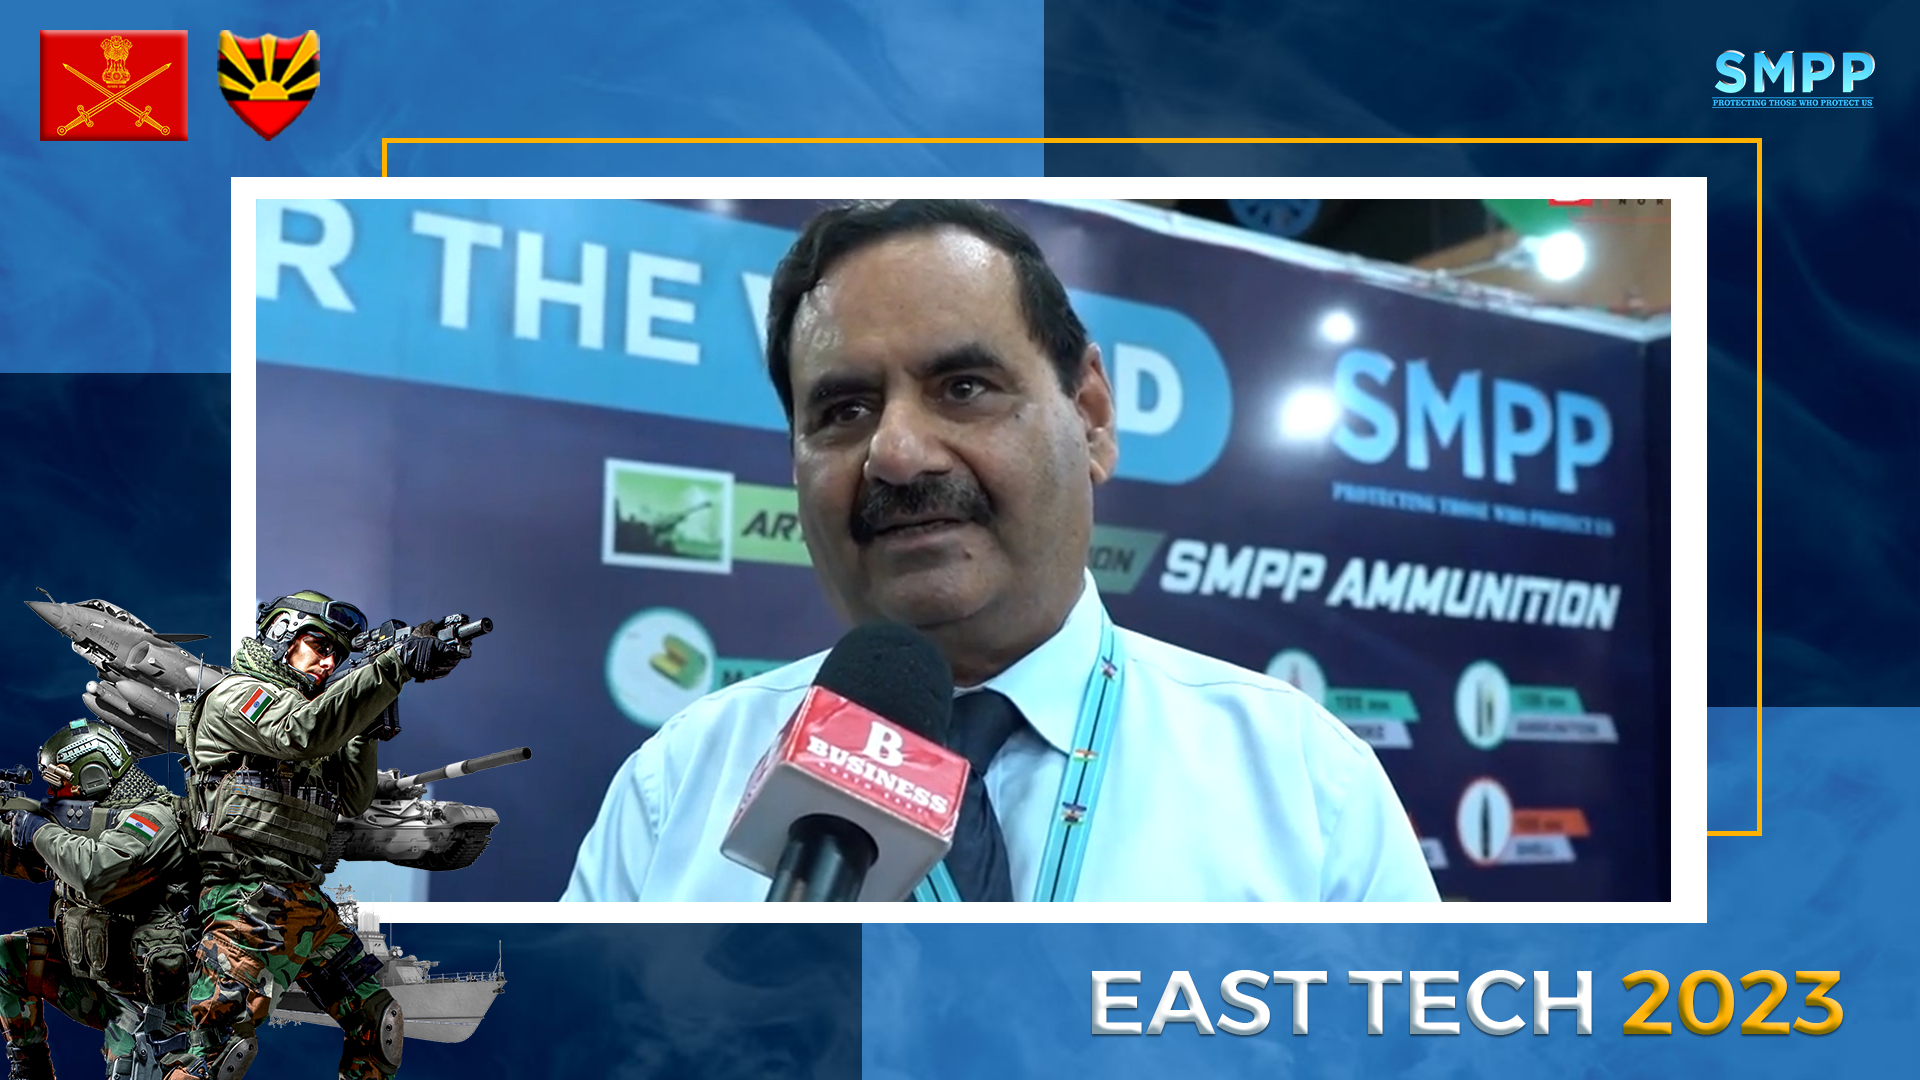 East Tech 2023: Indian Army's Eastern Command Promotes Indigenous Defense Manufacturing | SMPP